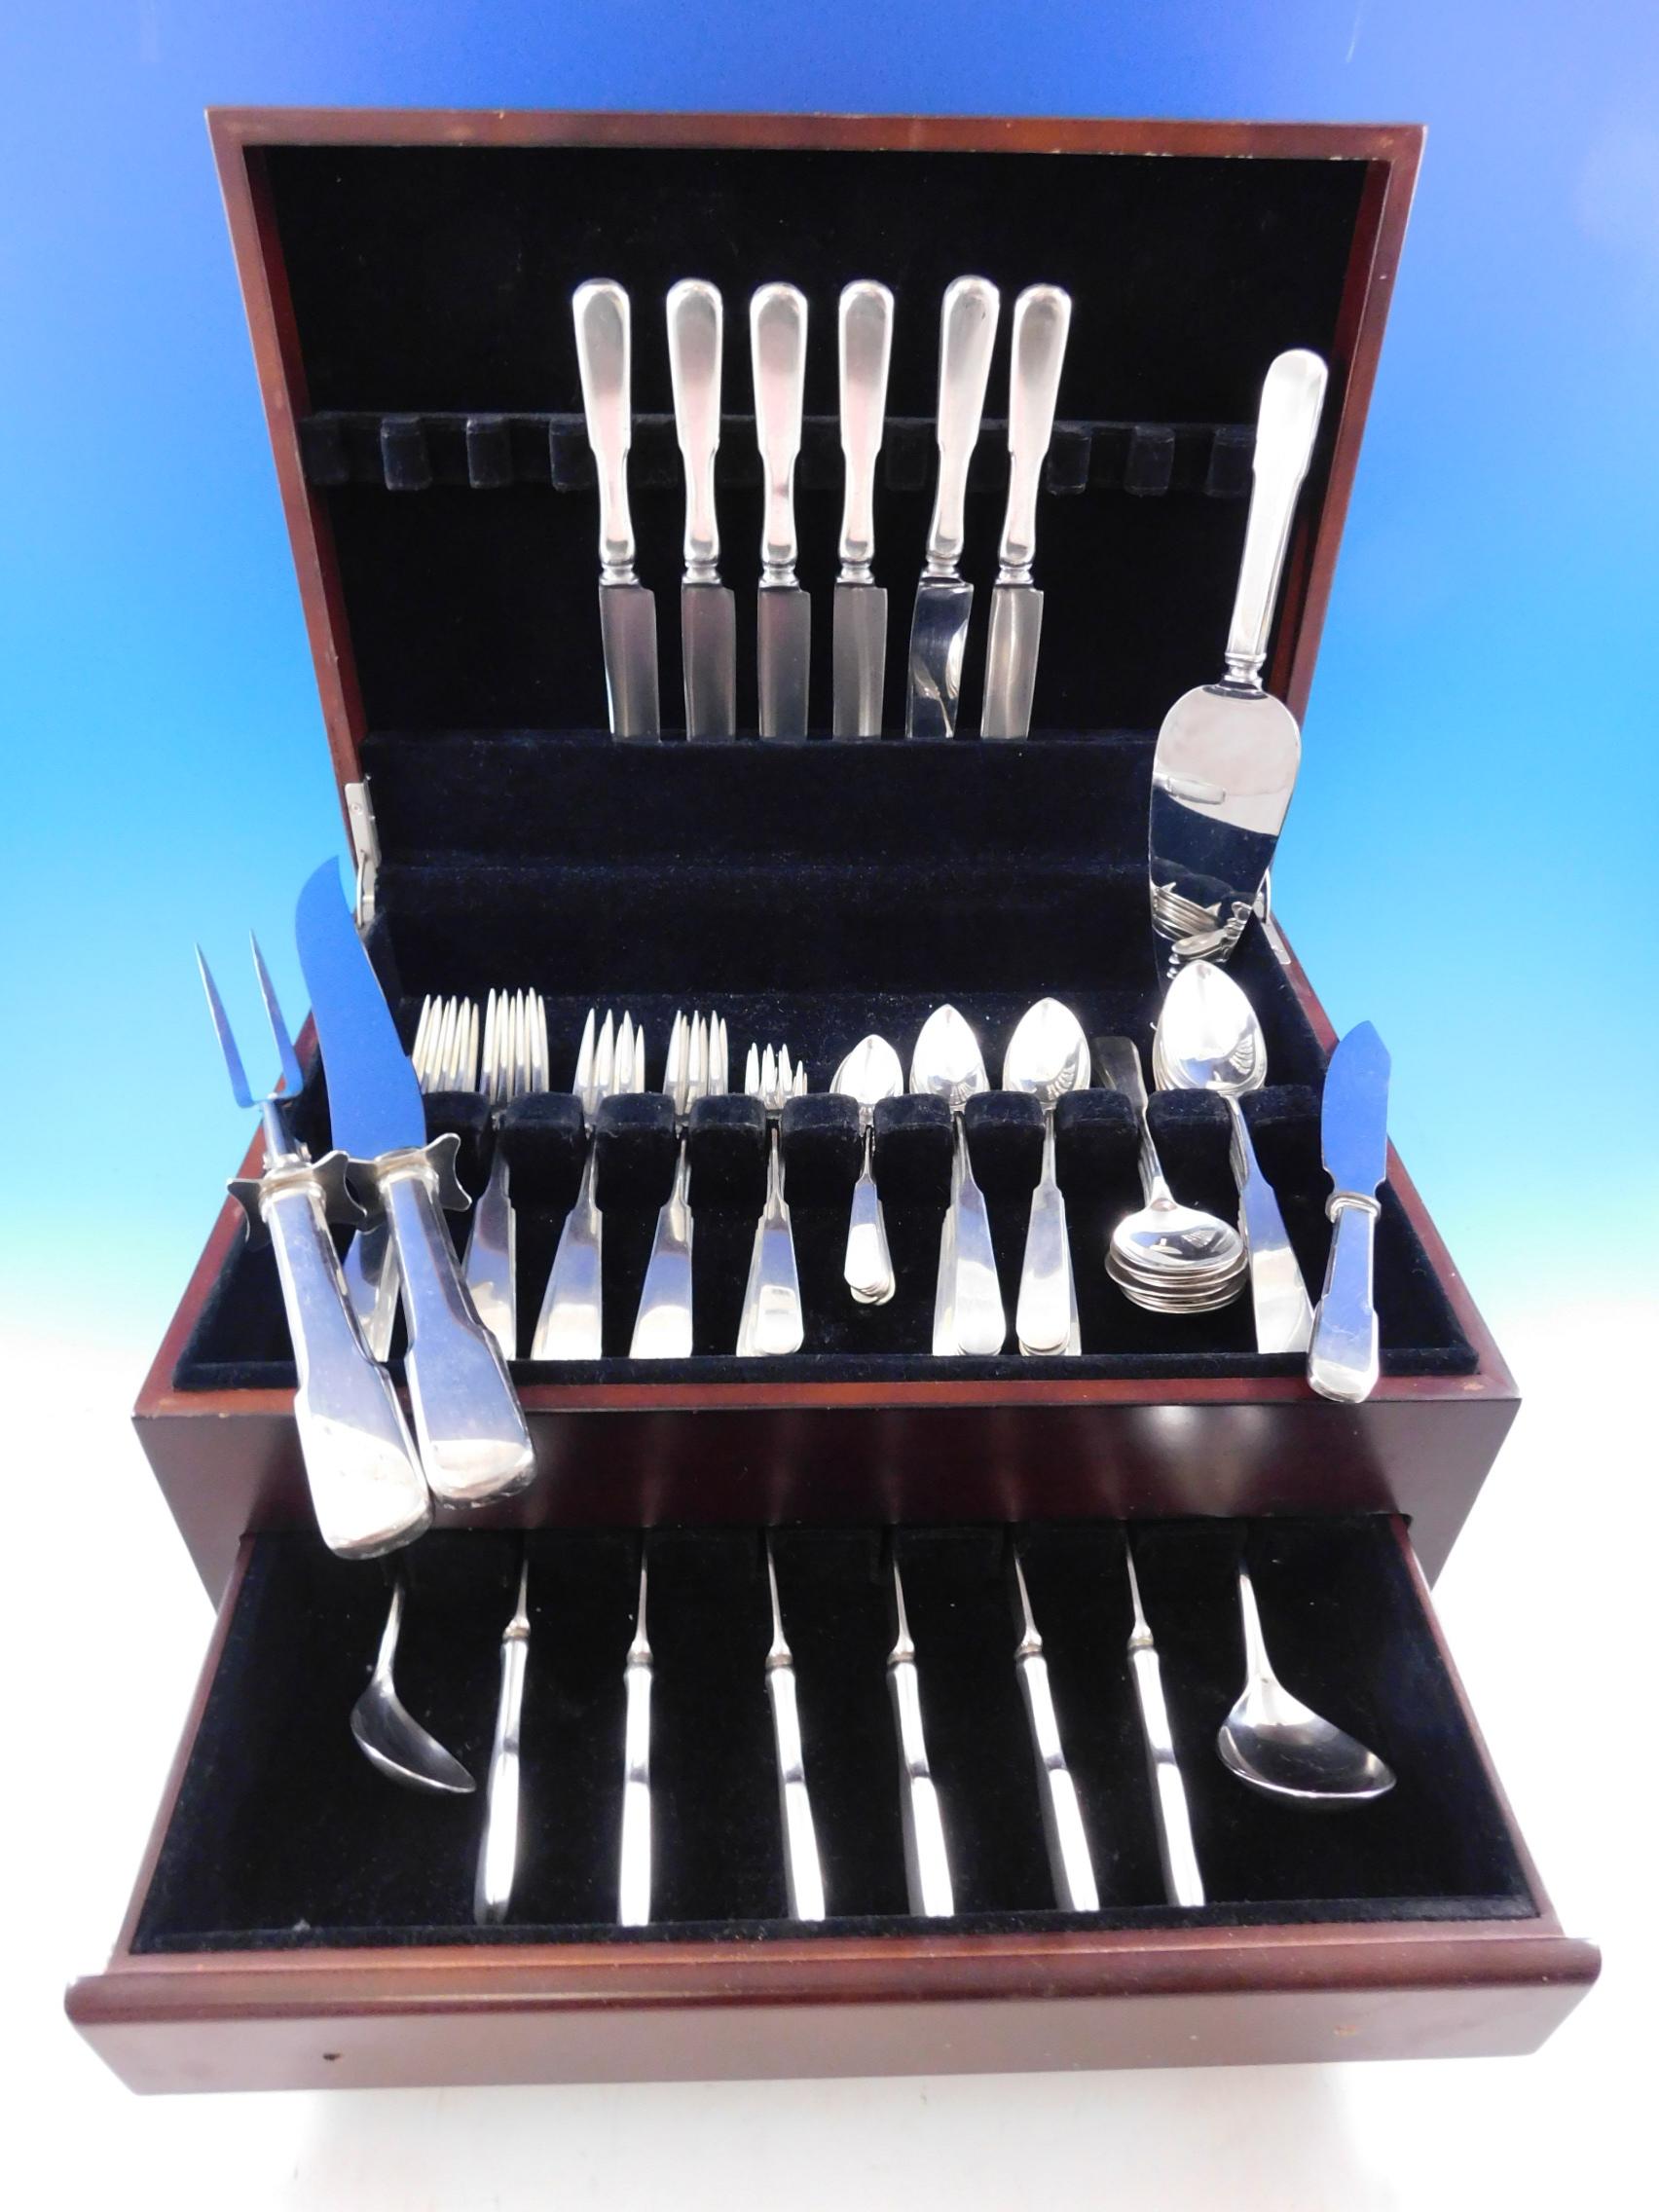 Lexington Georg Jensen USA sterling silver flatware set with classic fiddle shaped handles, 66 pieces. This set includes:

6 knives, 8 3/4